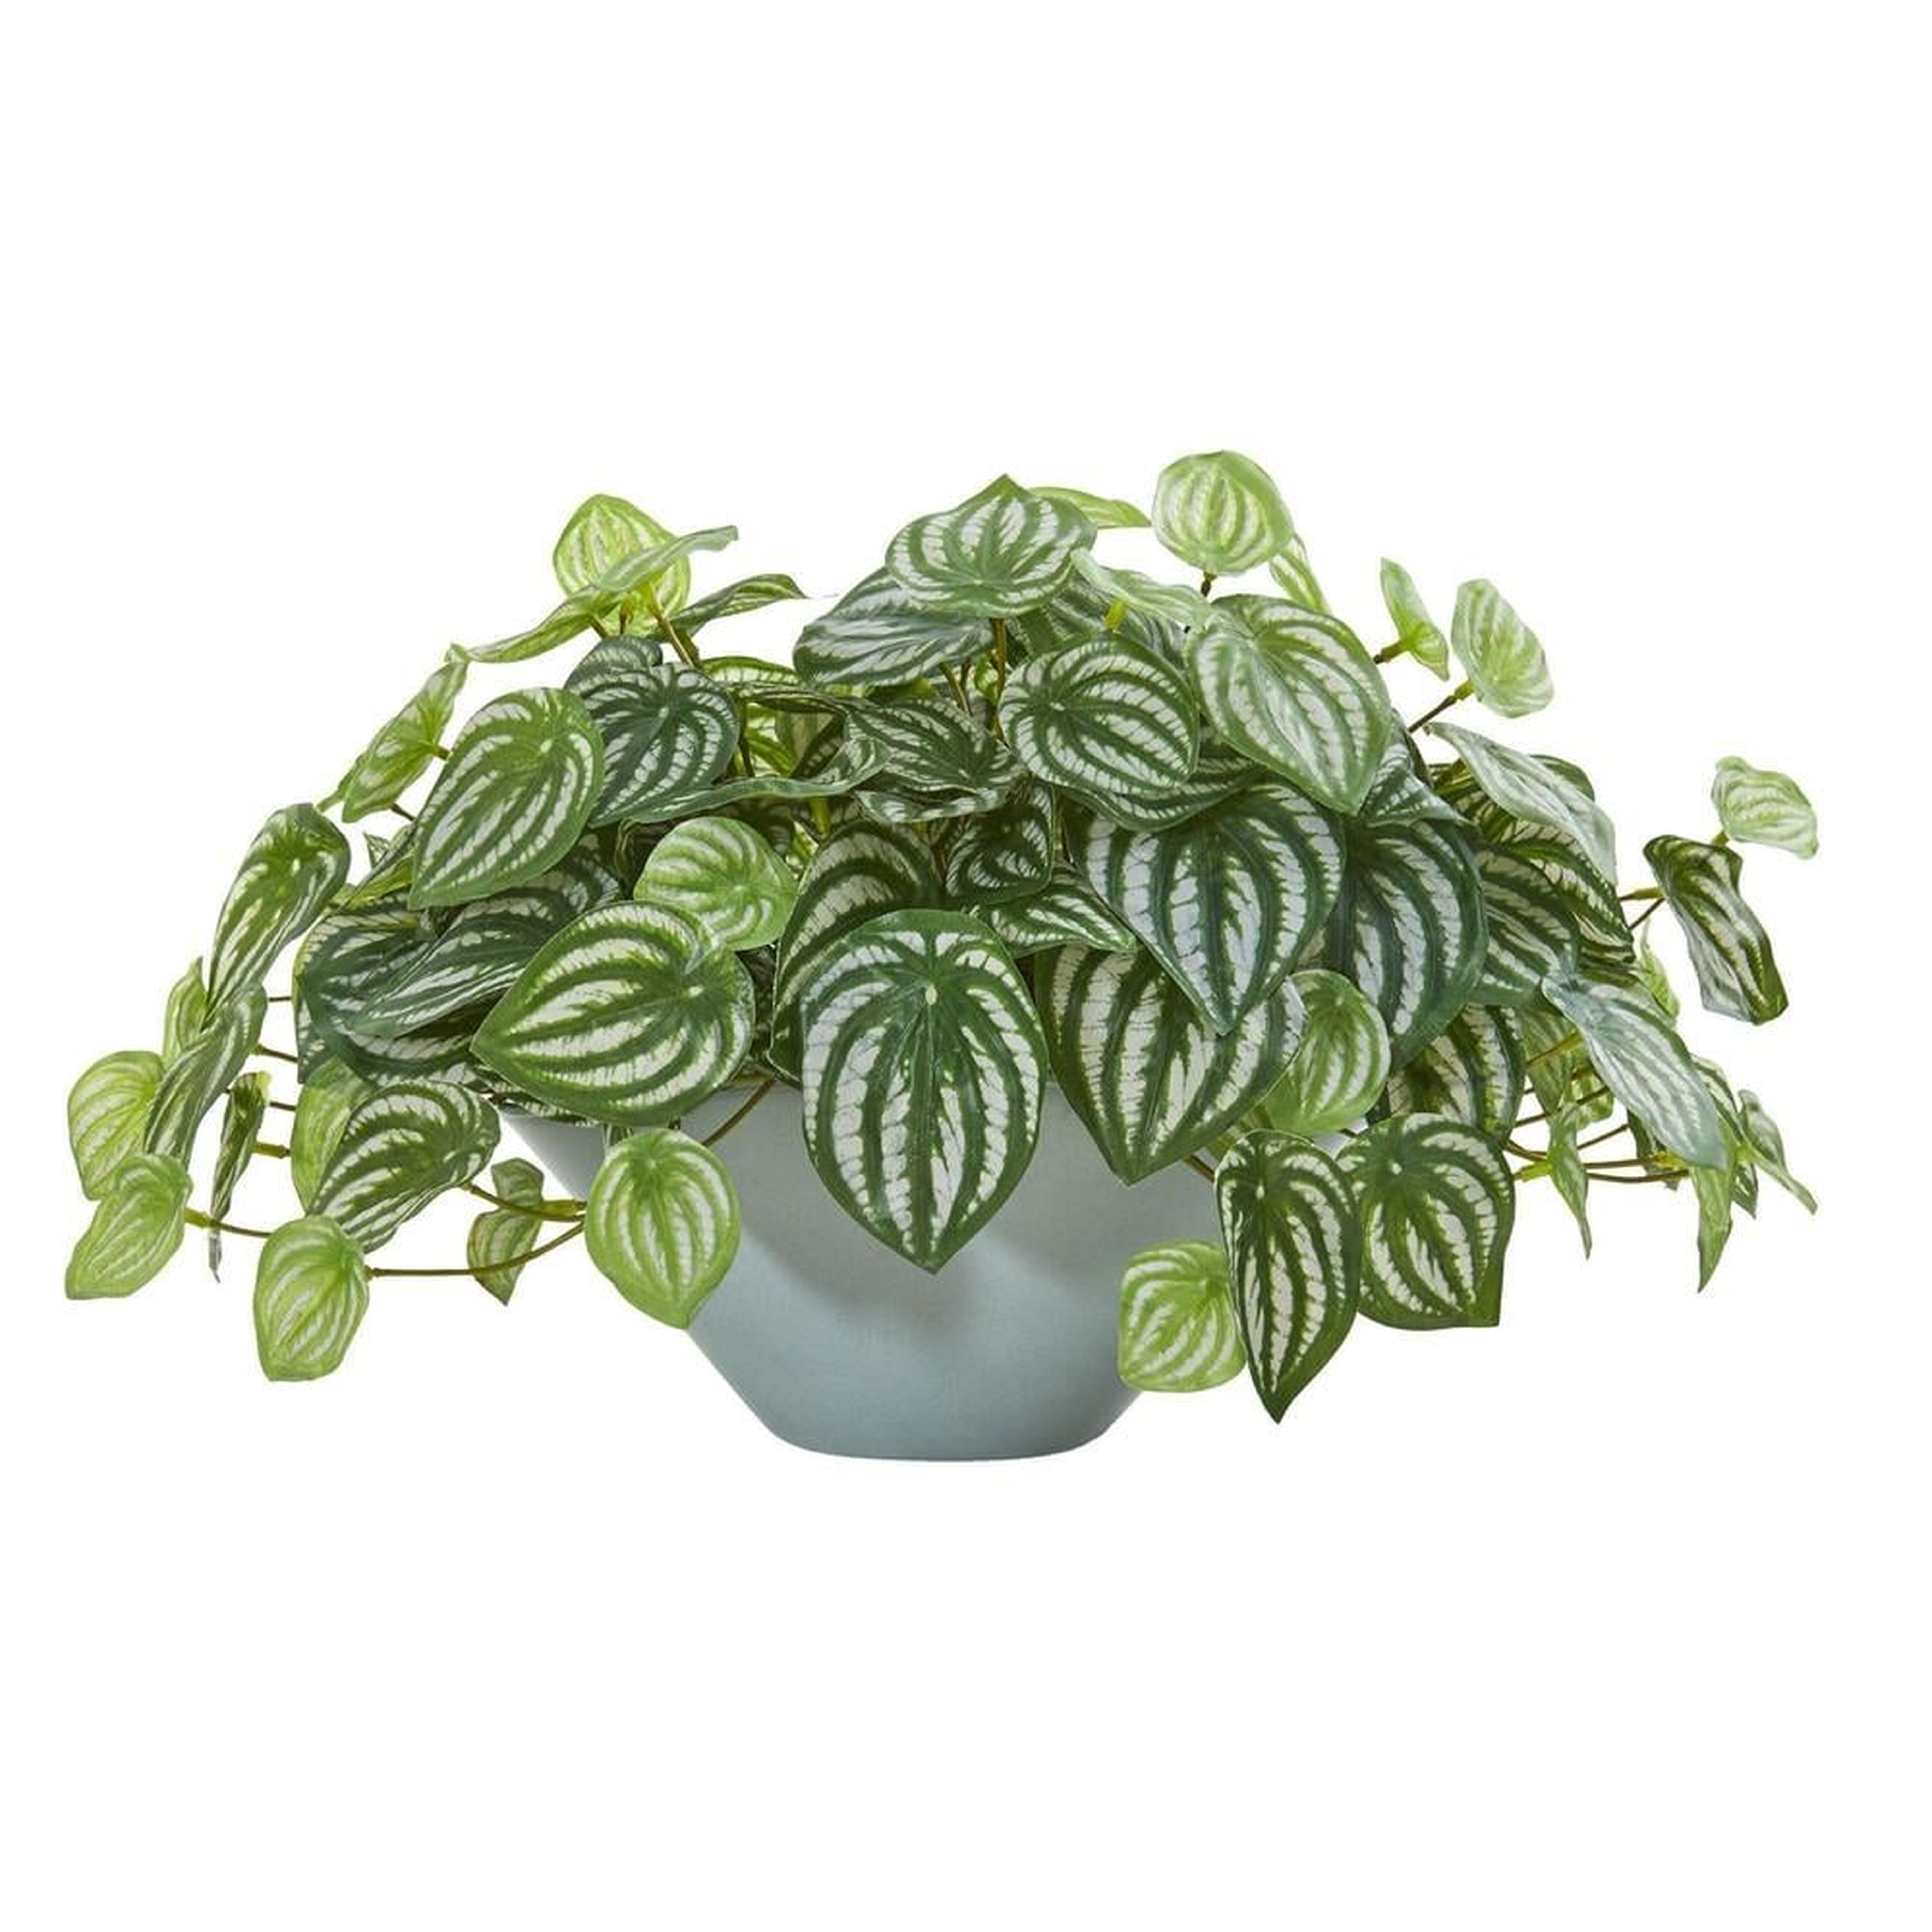 19" Watermelon Peperomia Artificial Plant in Vase - Fiddle + Bloom